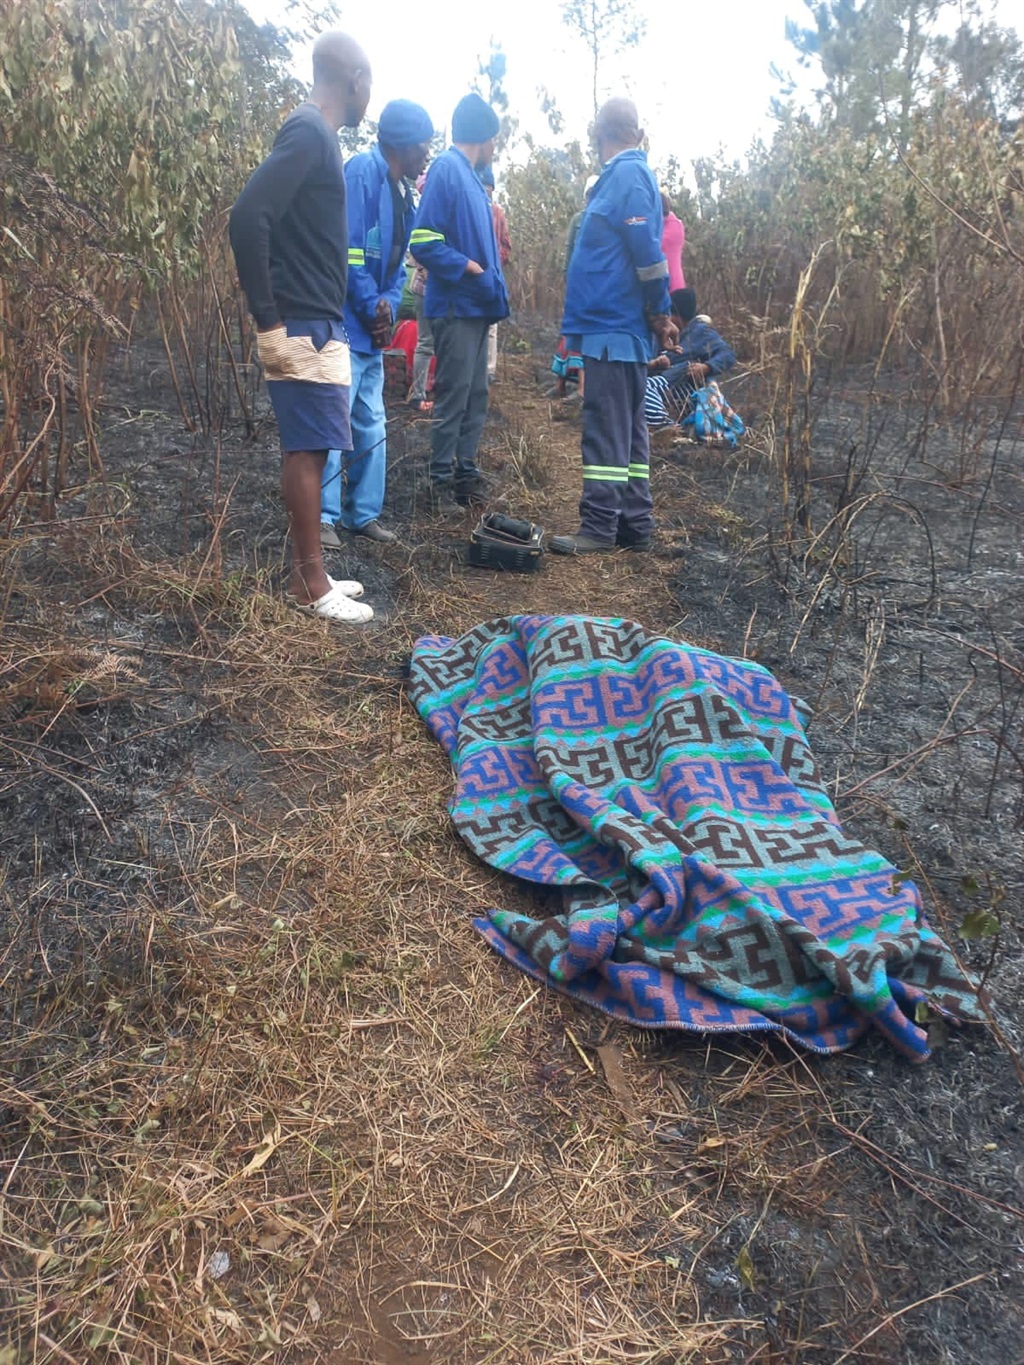 Tragic: Villagers at the scene where the body of gogo (66) was found.